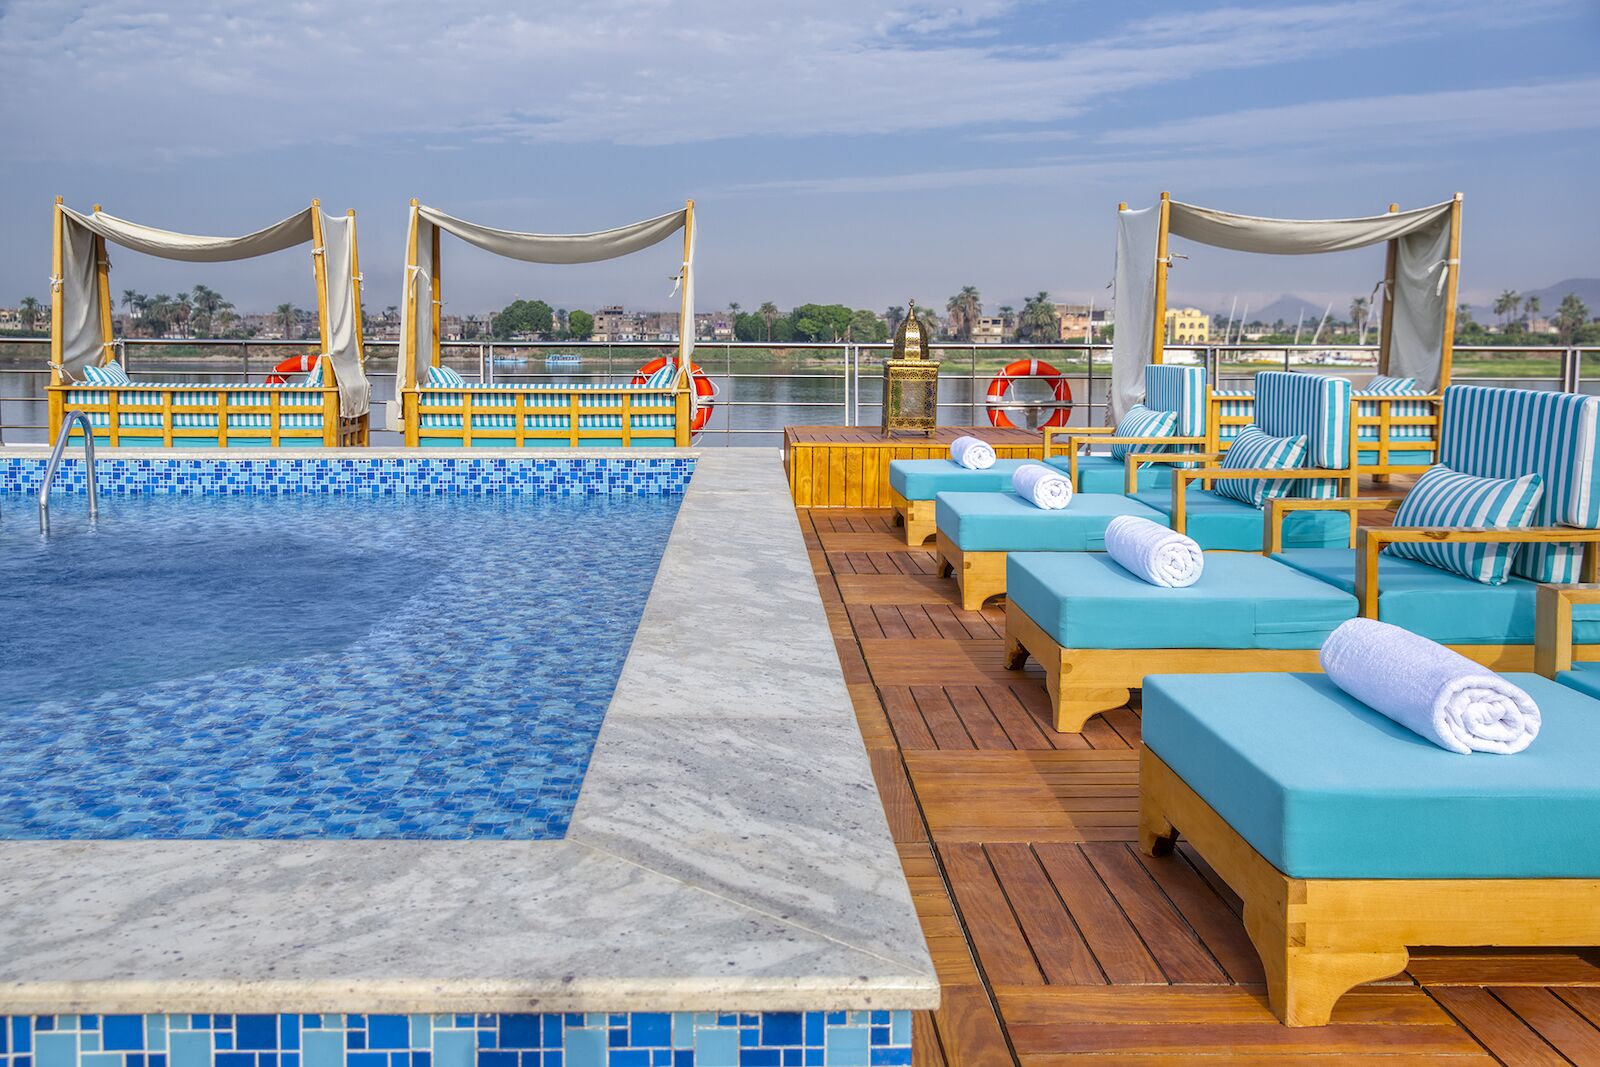 Pool aboard the S.S.Sphinx, a luxurious ship for an Egyptian river cruise on the Nile